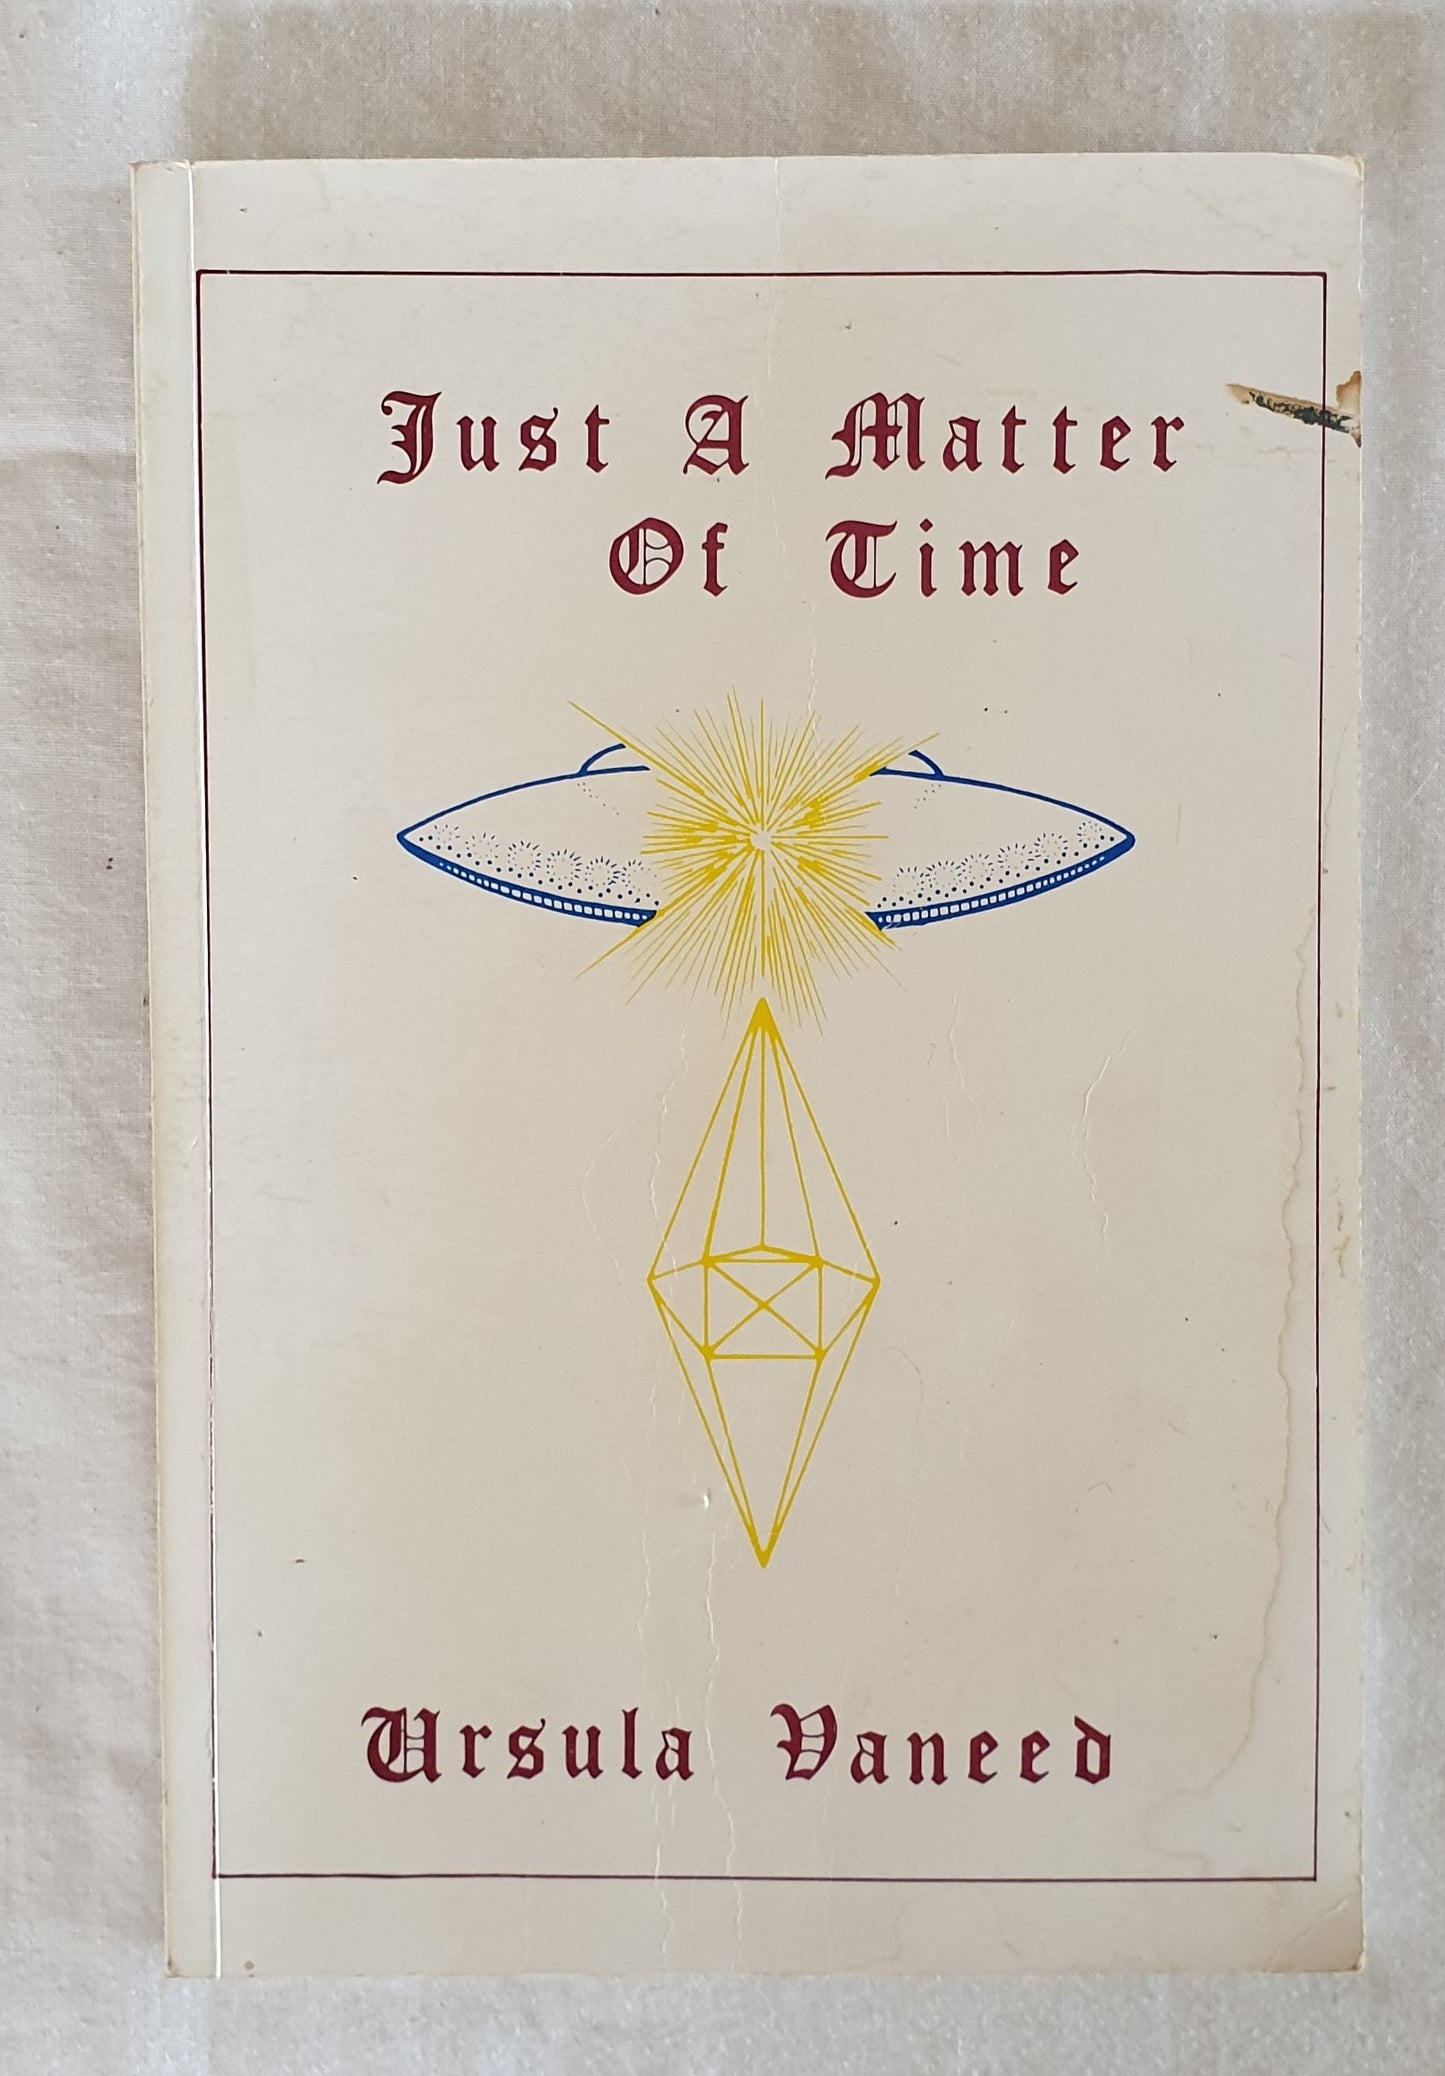 Just A Matter of Time by Ursula Vaneed